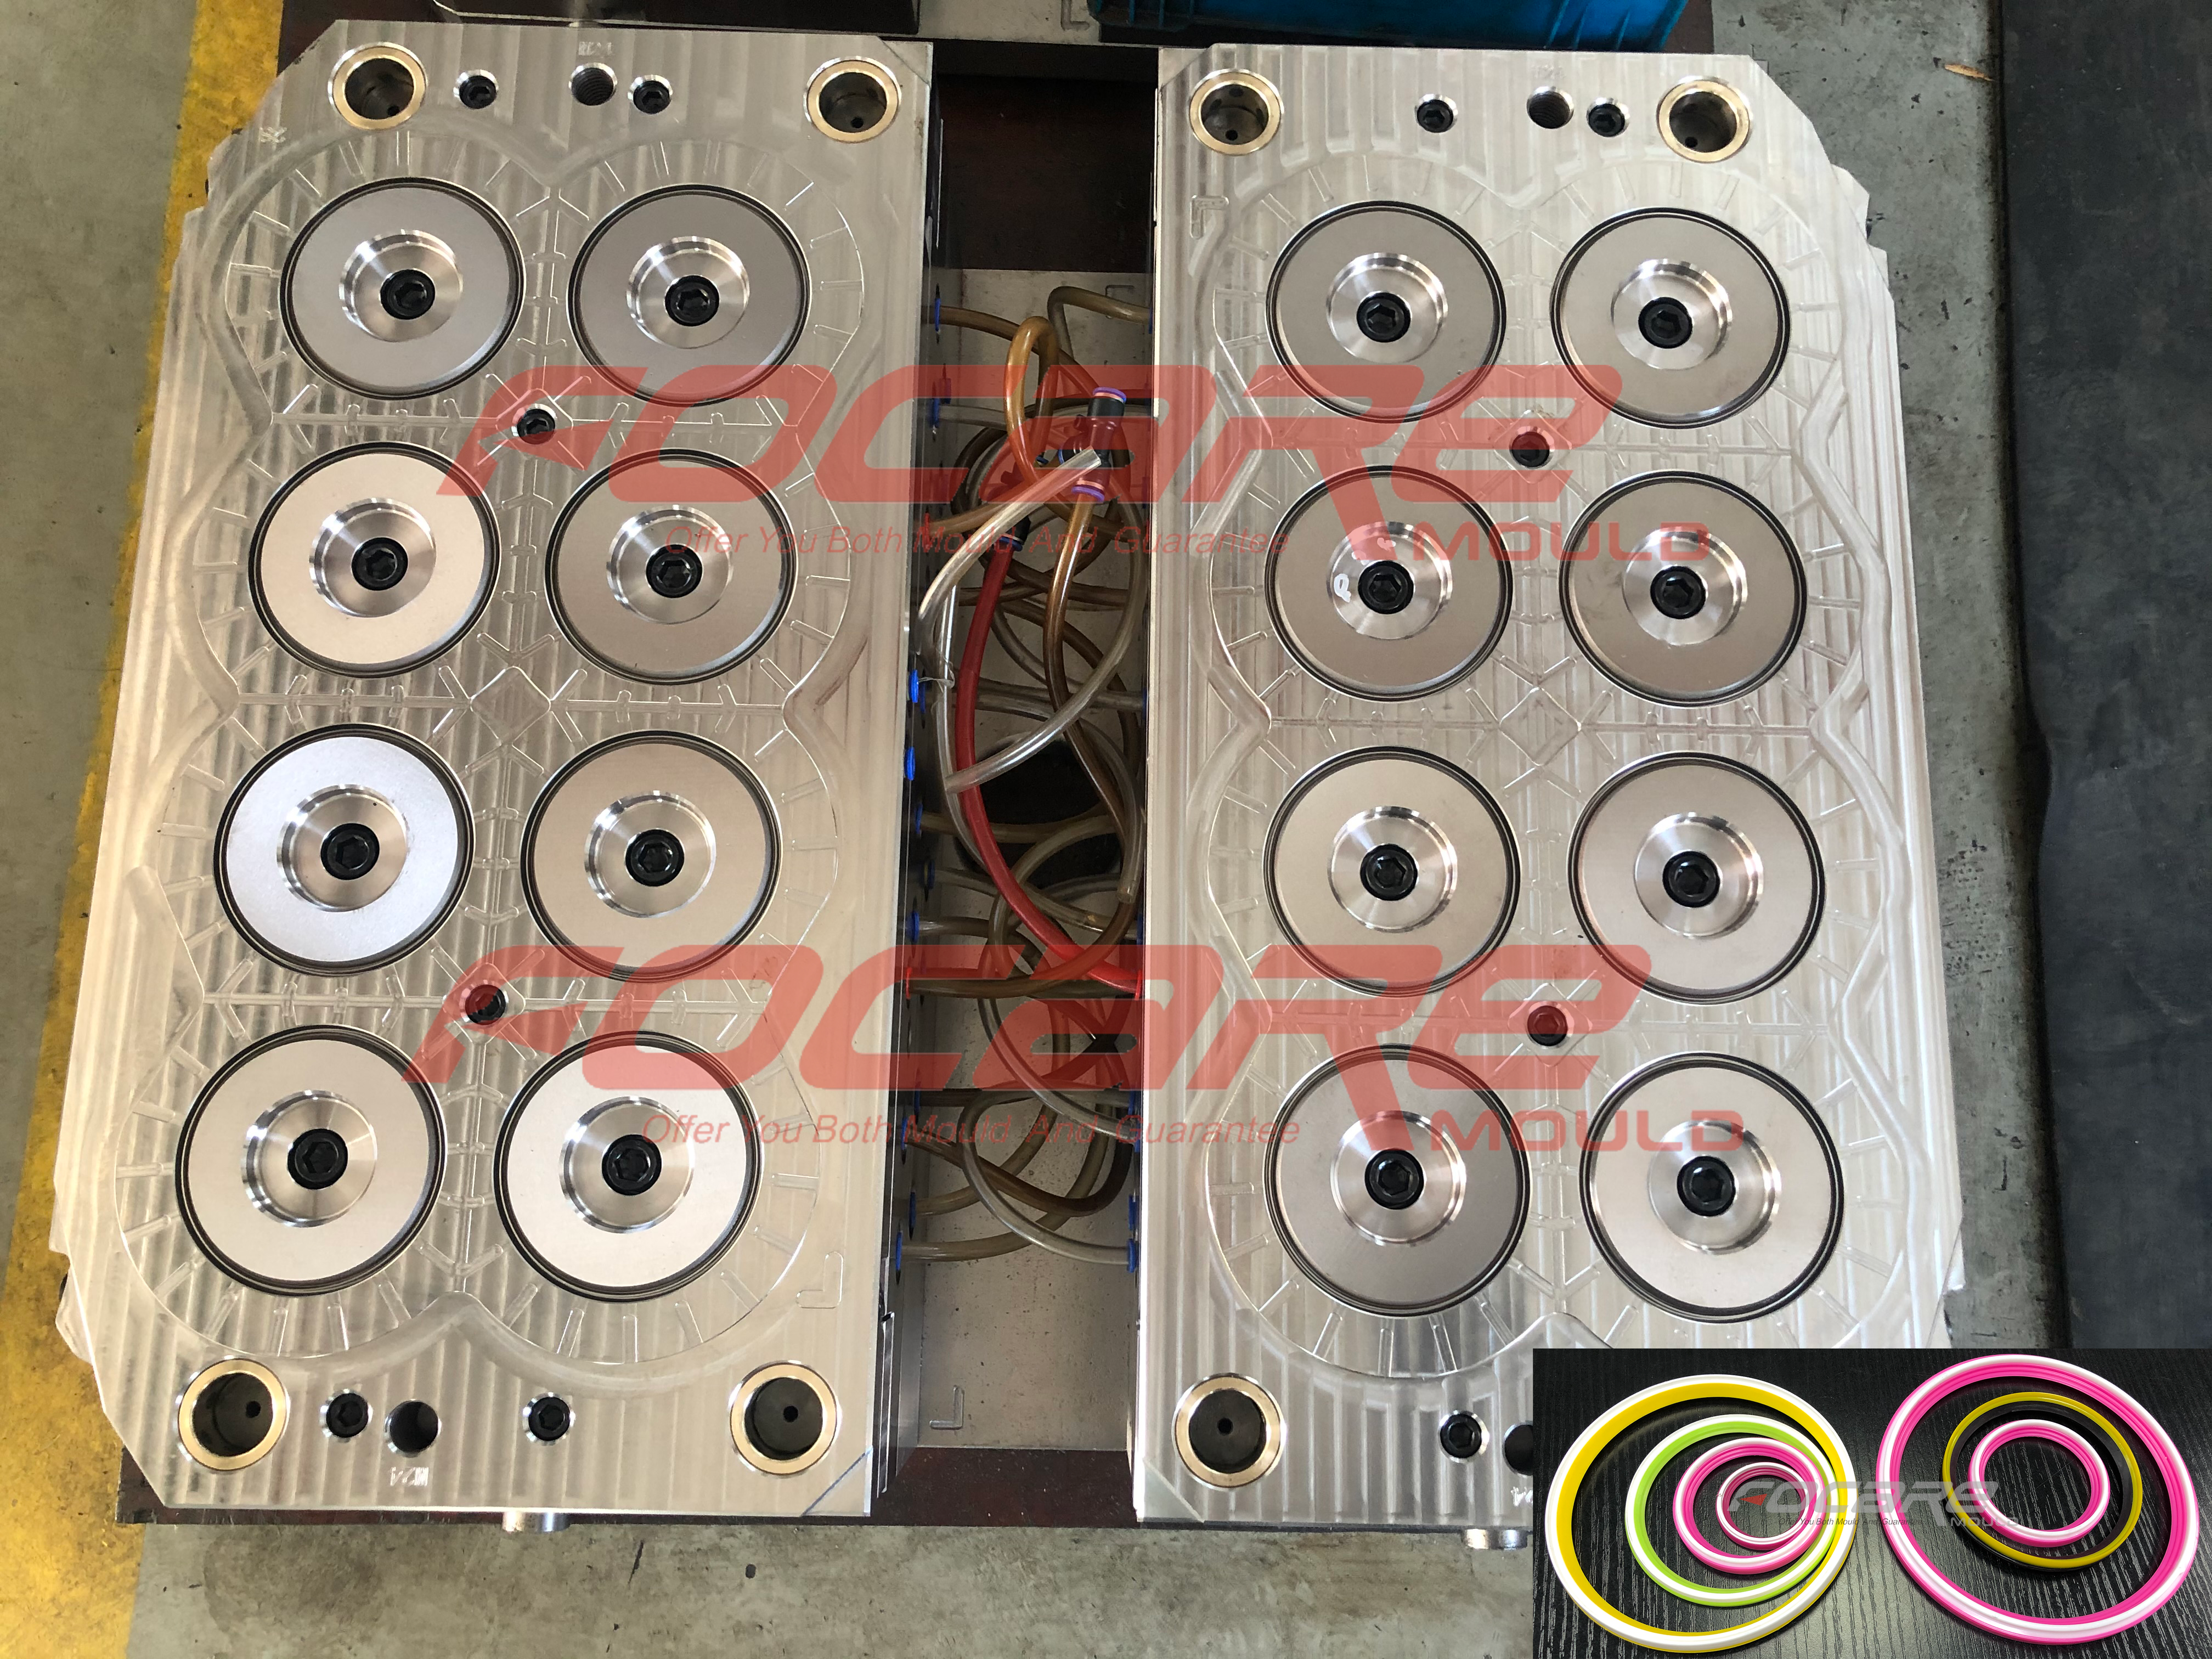 High quality Two color SWR seal ring plastic injection mould Quotes,China Two color SWR seal ring plastic injection mould Factory,Two color SWR seal ring plastic injection mould Purchasing